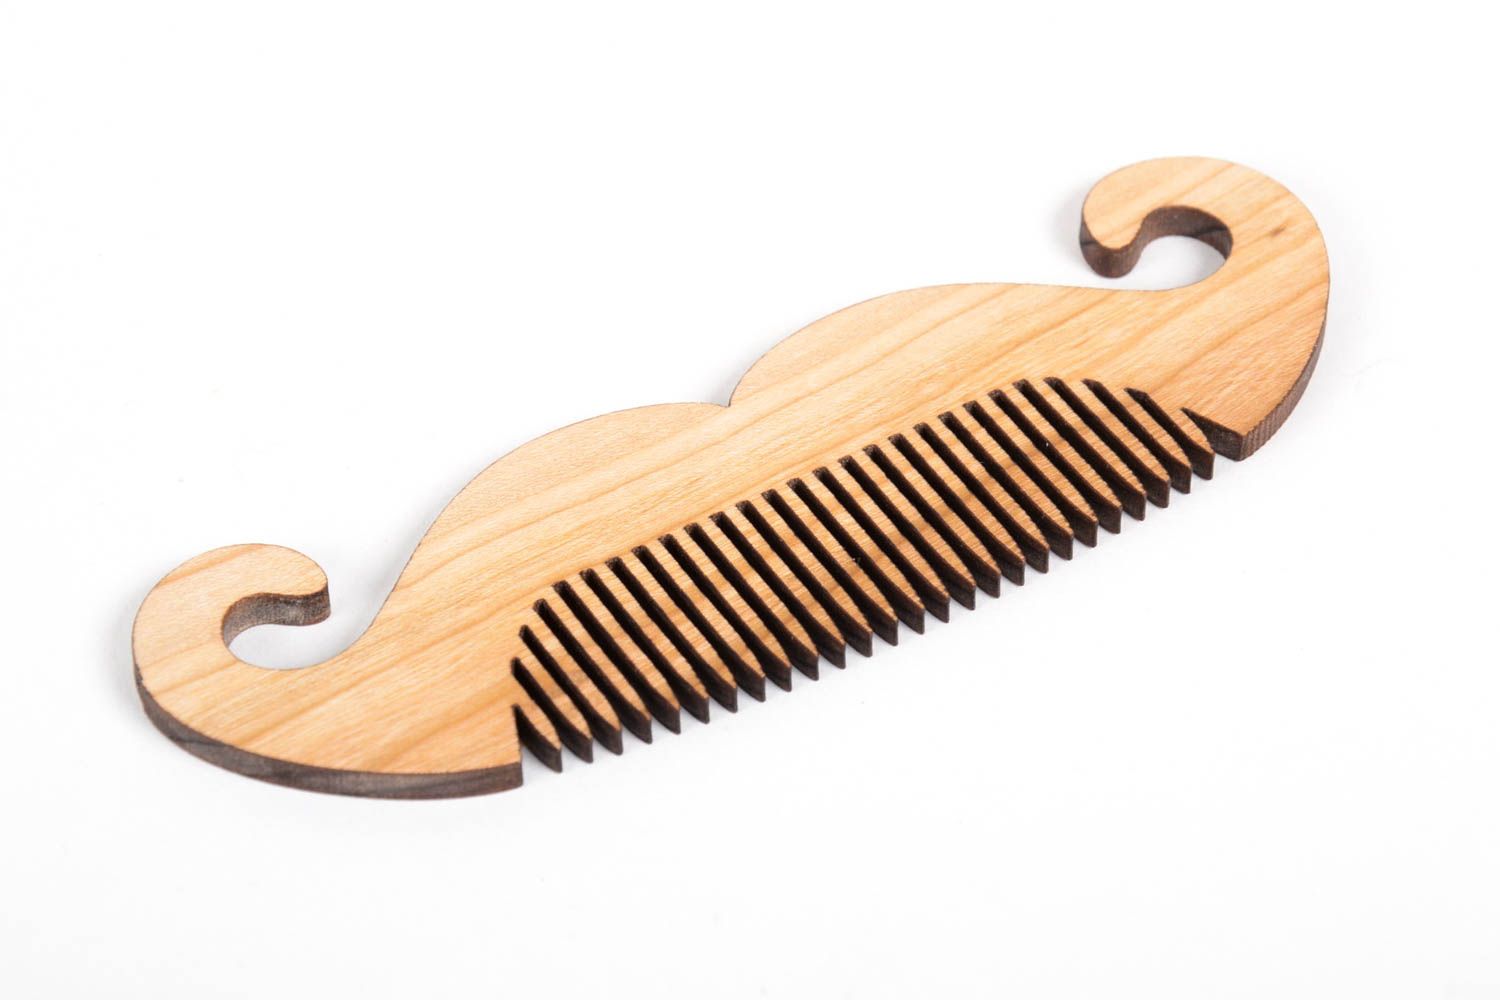 Stylish handmade wooden comb for men mustache comb beard comb best gifts for him photo 2